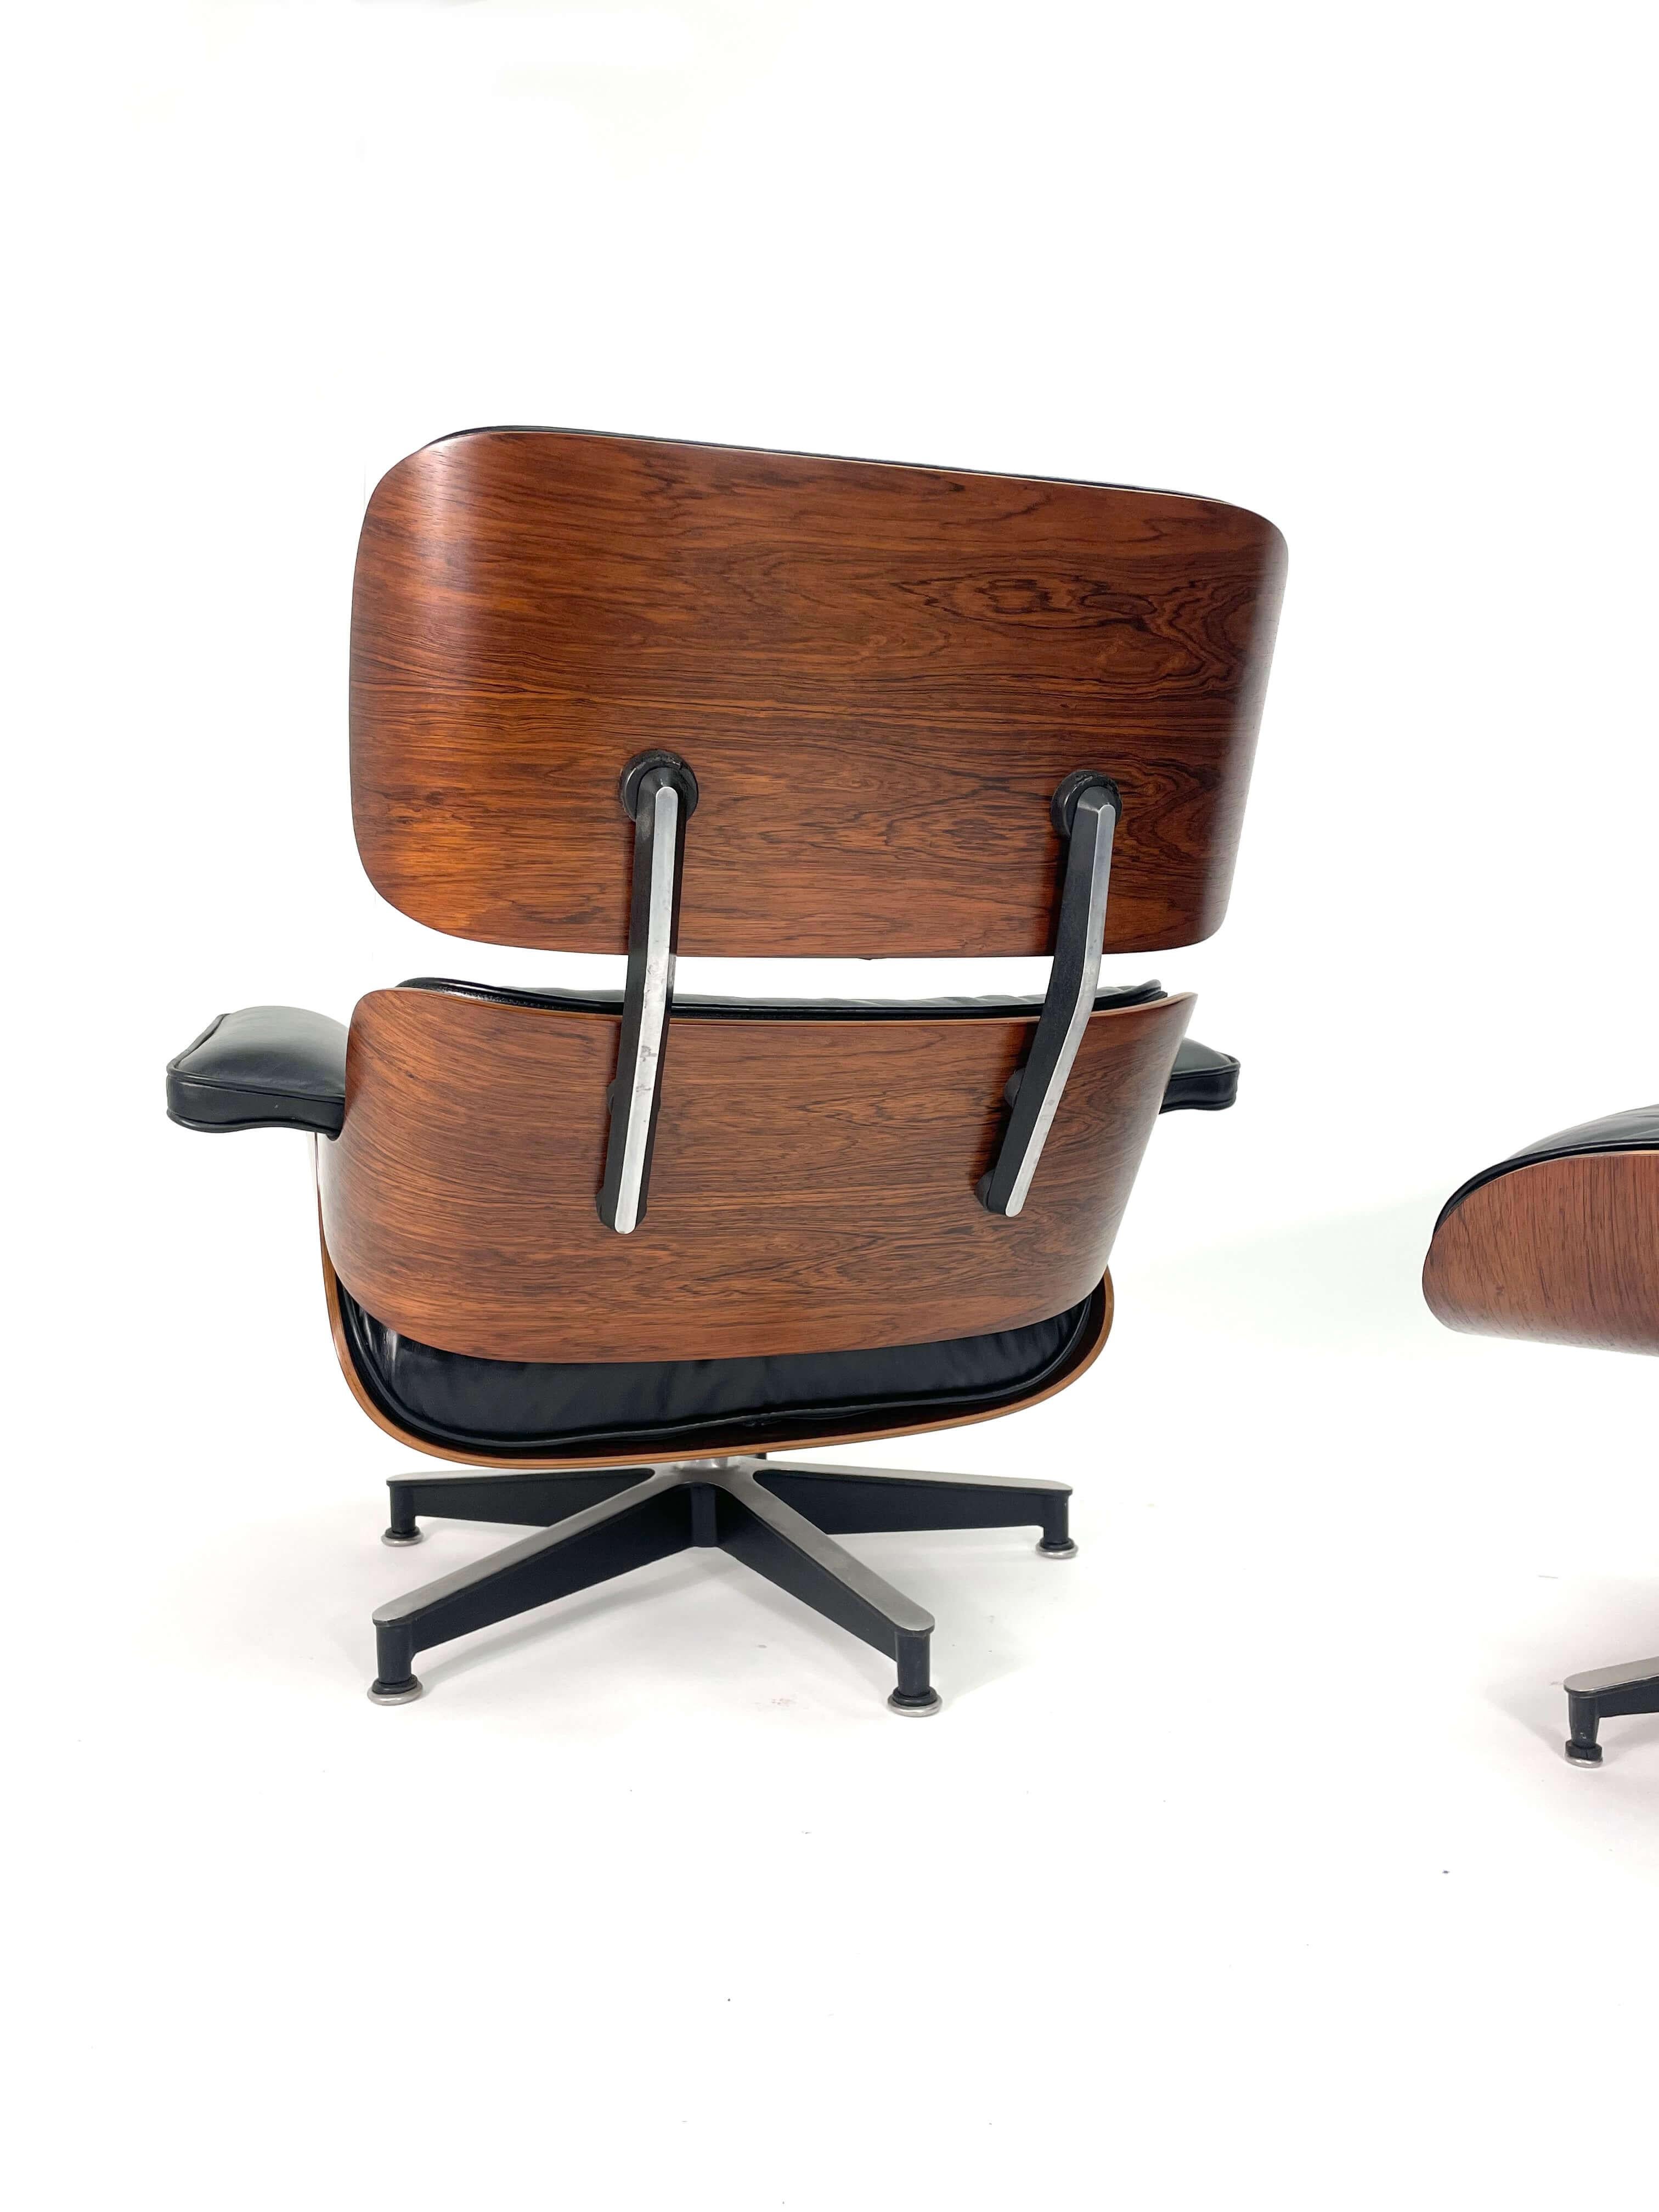 2nd Generation Eames Lounge Chair and Ottoman in Rosewood, Circa 1960's 3